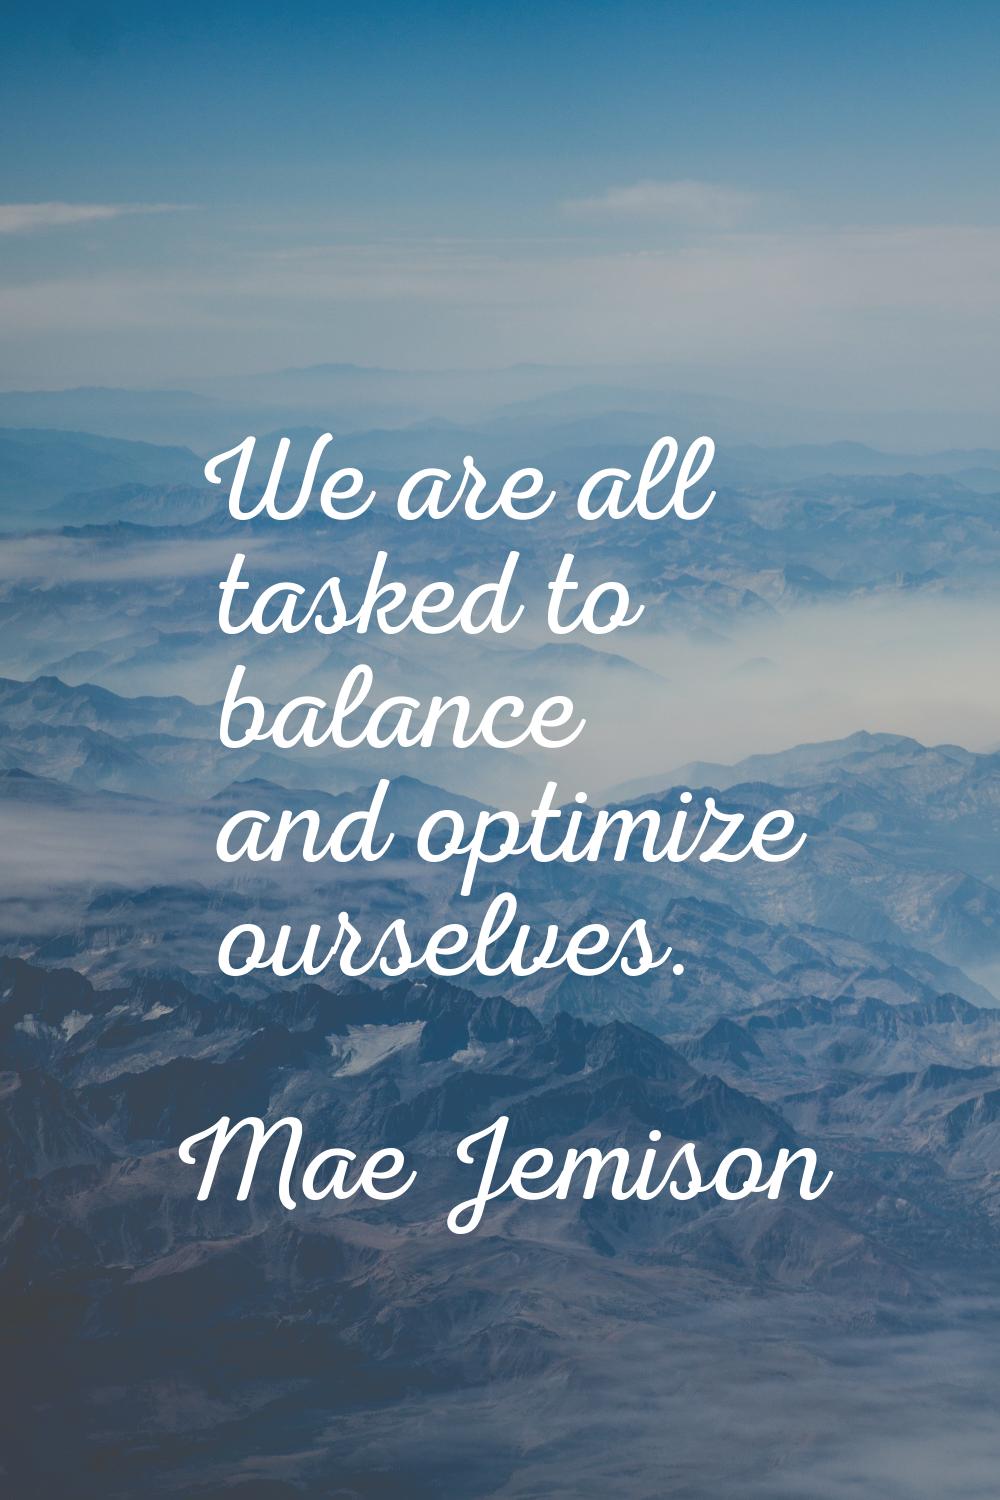 We are all tasked to balance and optimize ourselves.